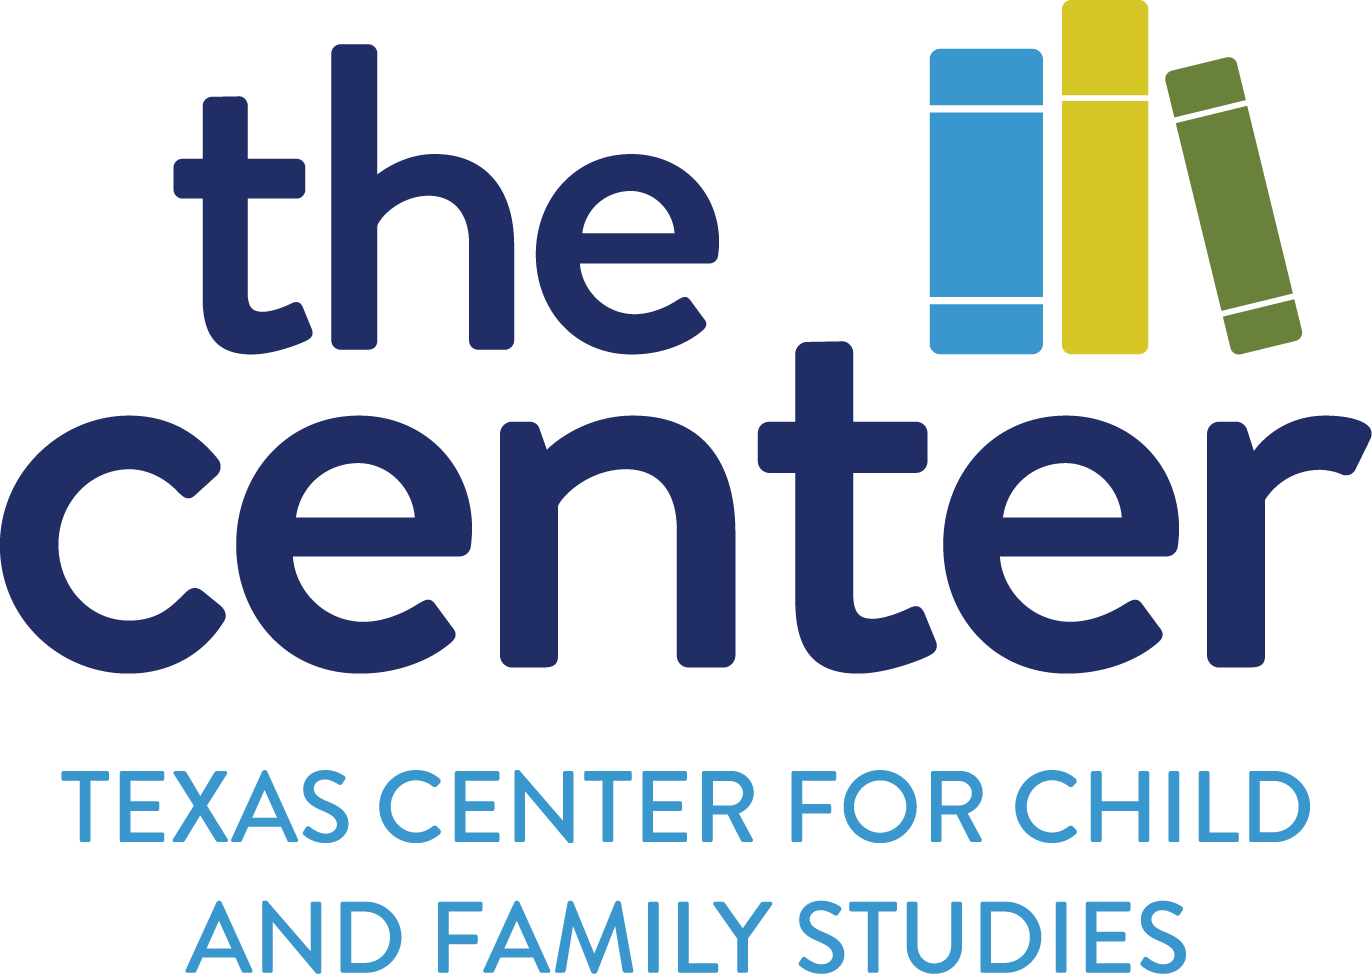 Texas Center for Child and Family Studies